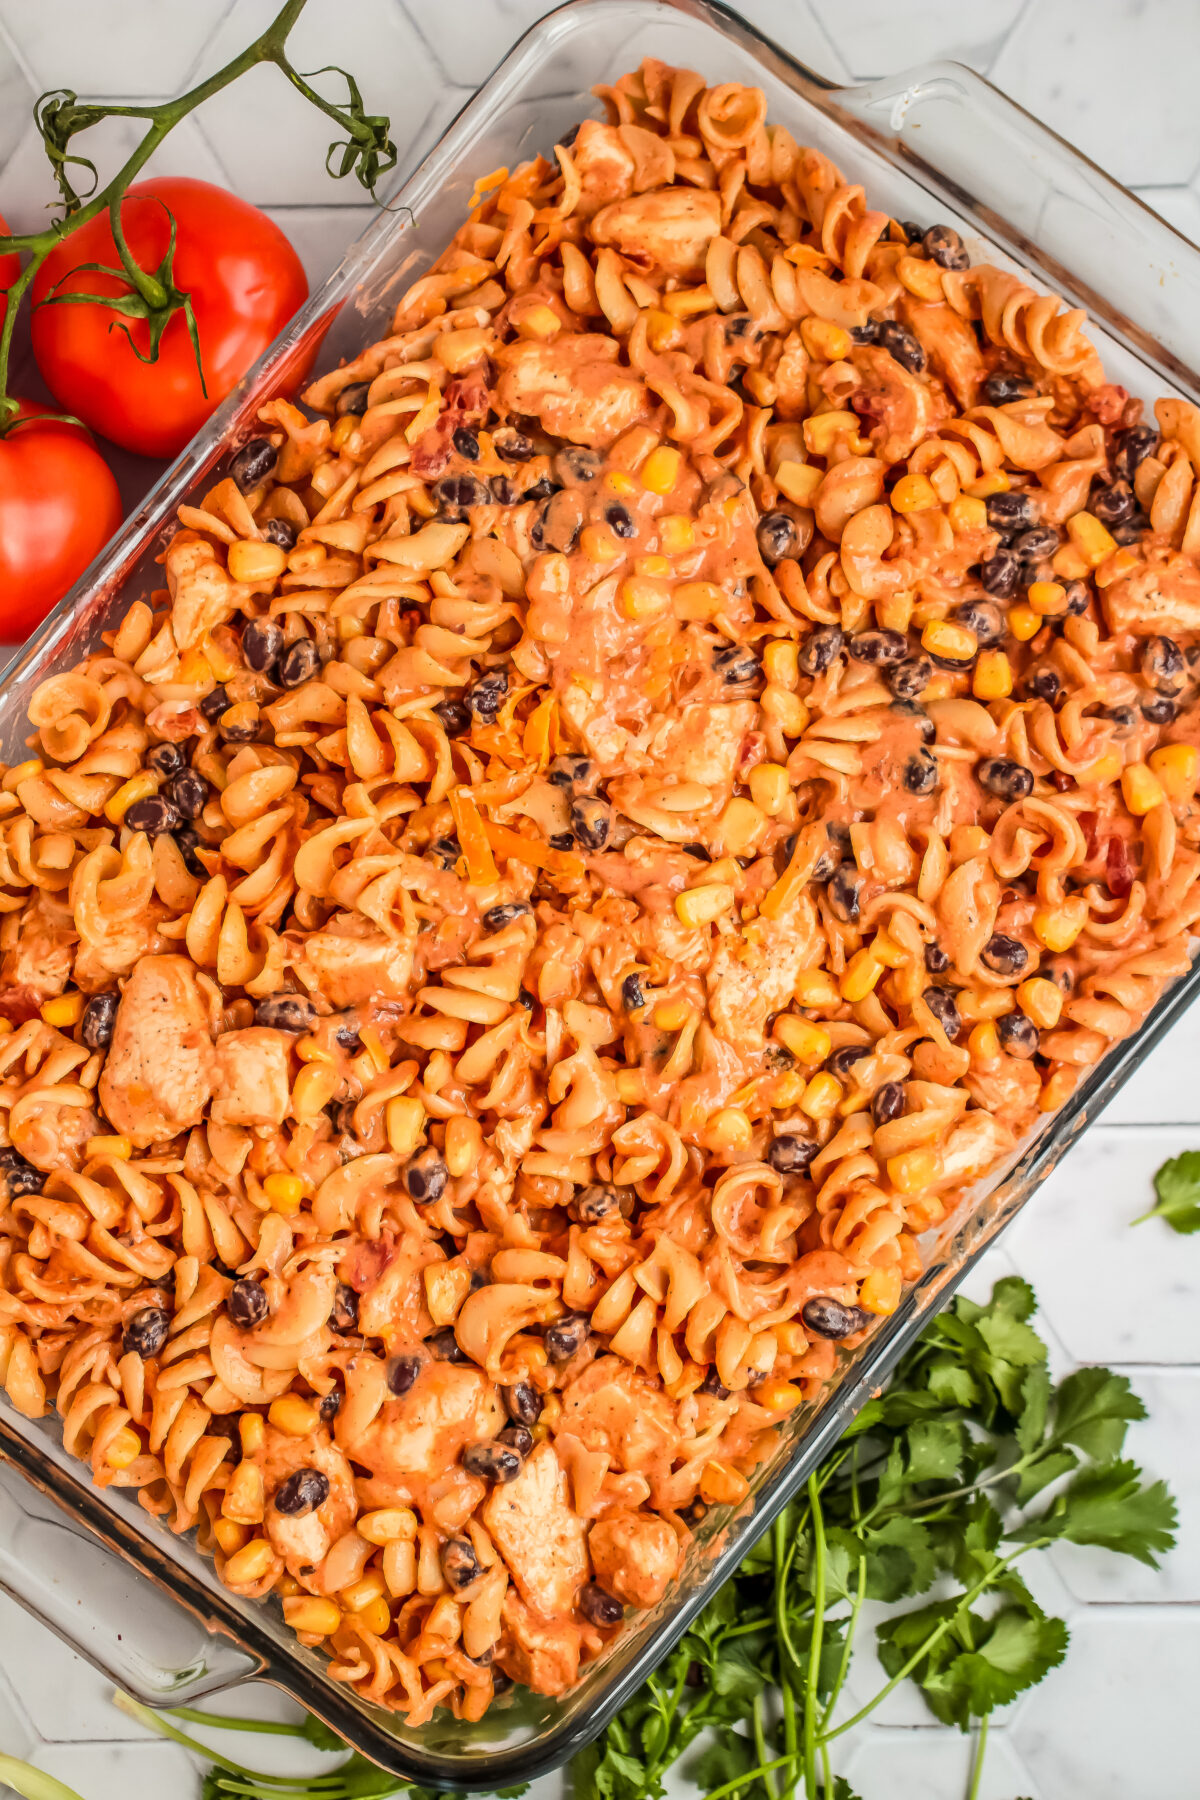 Pasta and chicken mixture poured into a casserole dish.